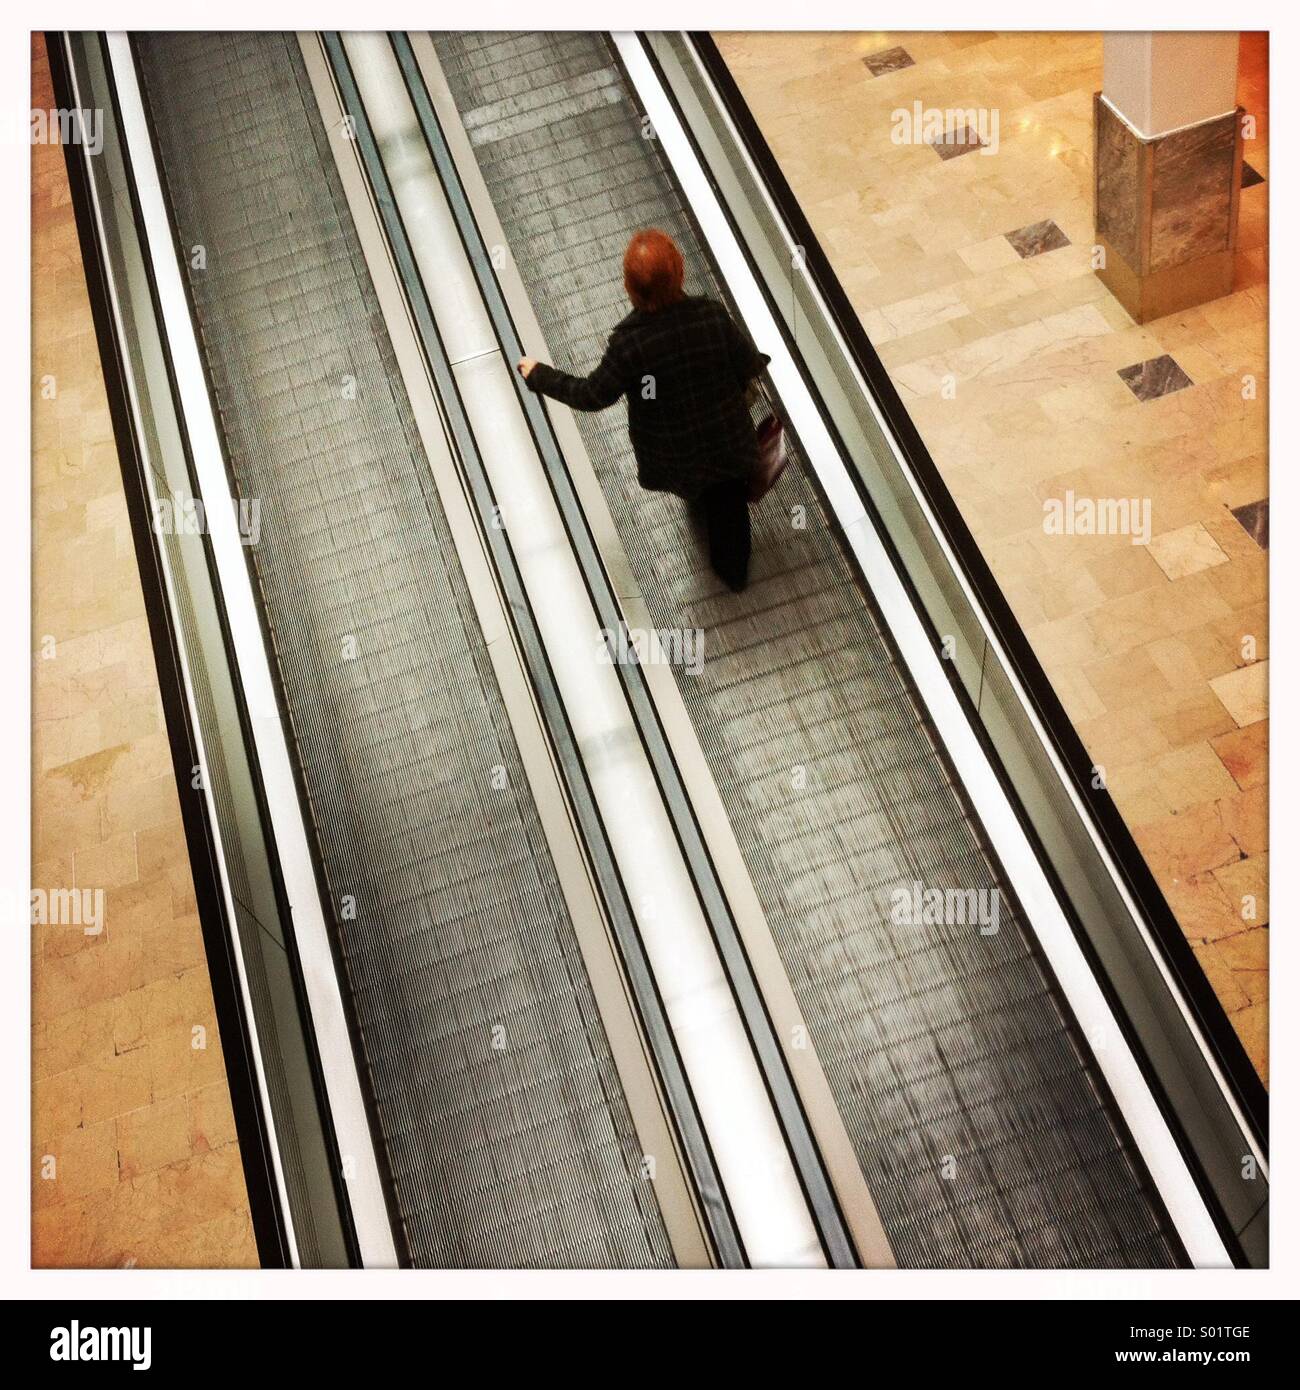 Woman on escalator Banque D'Images